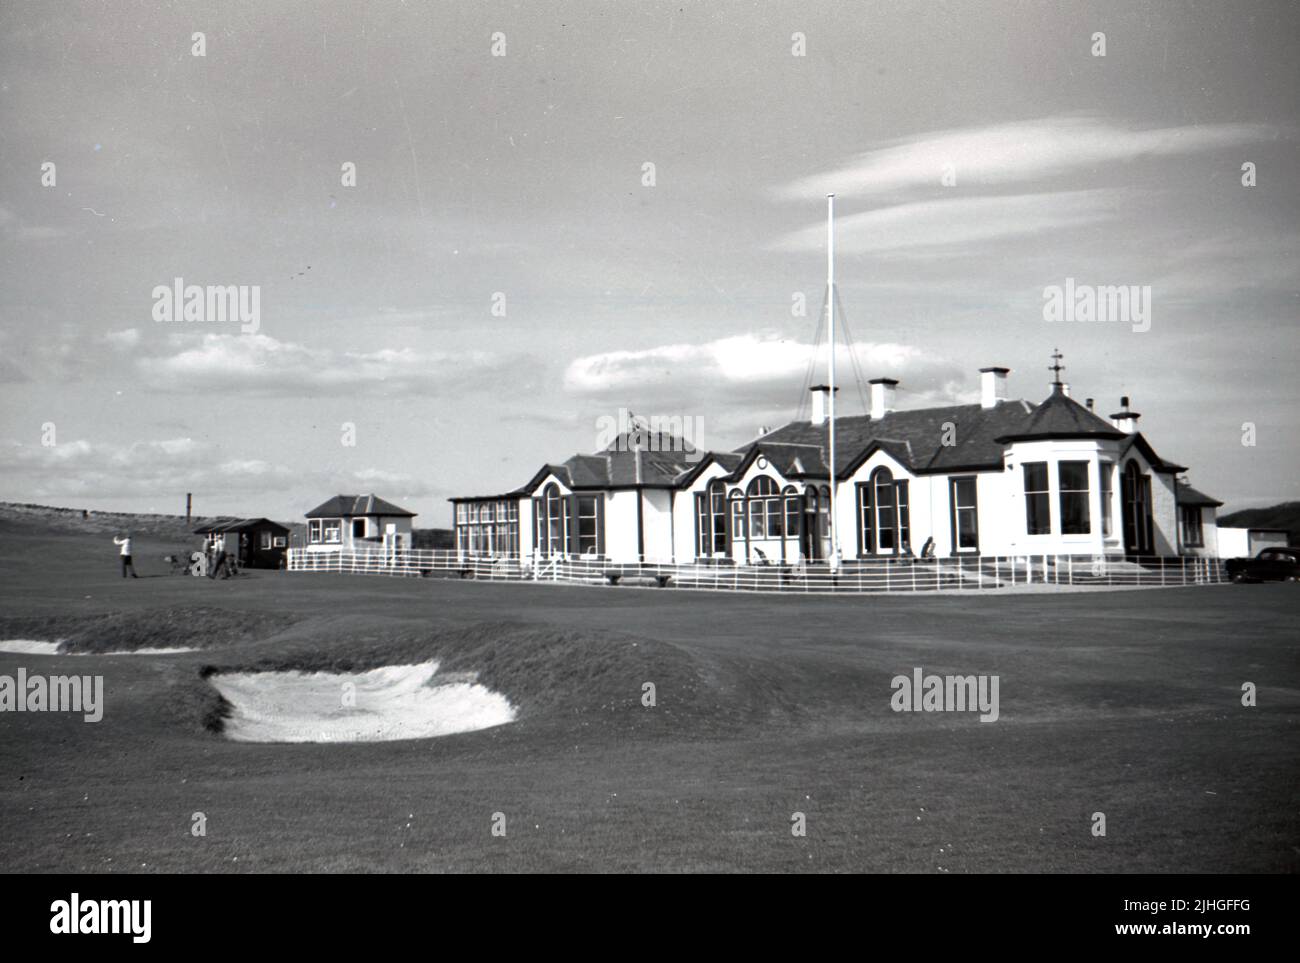 1950s, historical, exterior of the golf house, Fife, Scotland, UK, home of the Golf House Club established in 1875 and which takes it name from the 'golf house' or club house, the building of which began in 1875 and which was completed in 1877.  One of the finest links courses in Fife, the Elie Golf House Club is one of the oldest golf clubs in Scotland and it is thought that golf has been played on the land since the 15th century. Stock Photo